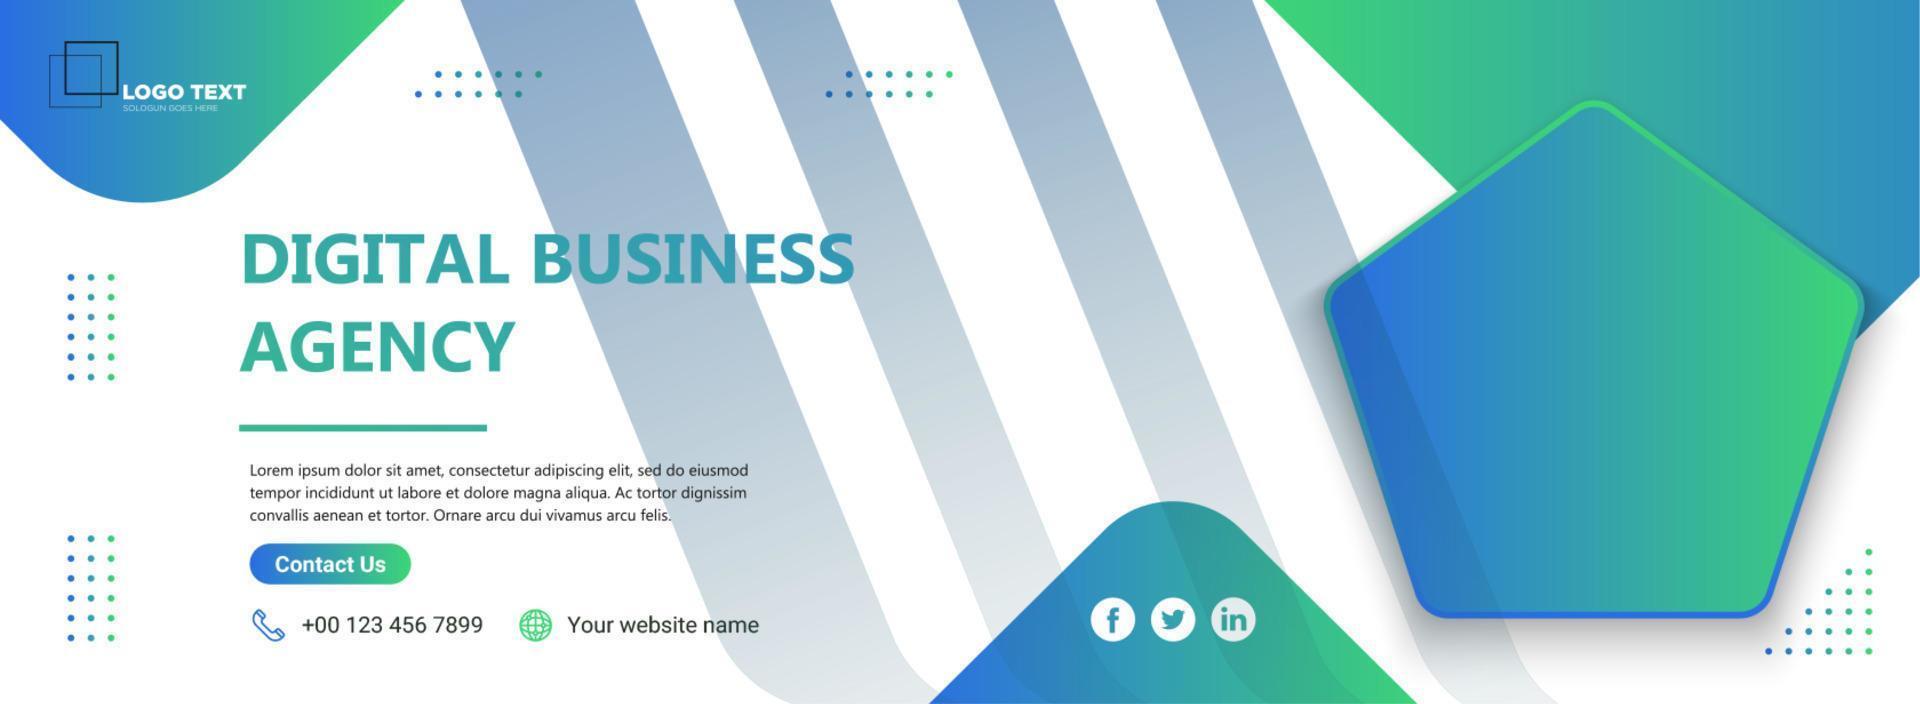 Digital marketing and business facebook cover and web banner template vector